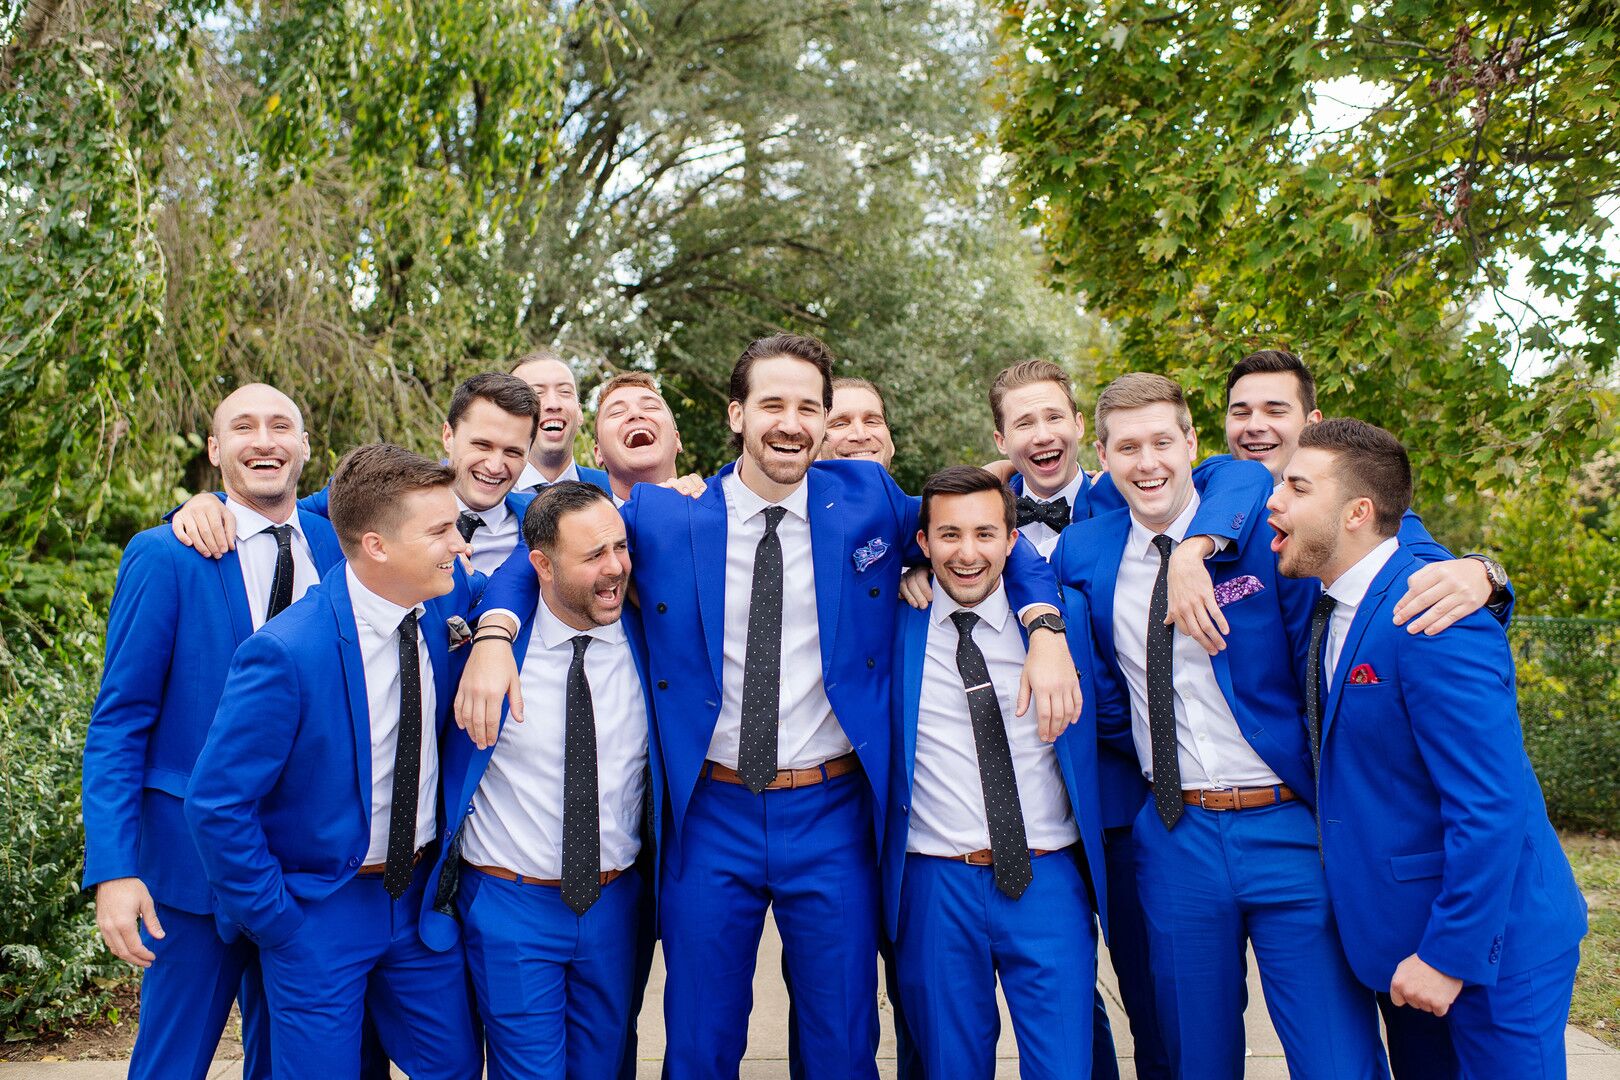 Groomsmen with Royal-Blue Suits and Black Ties